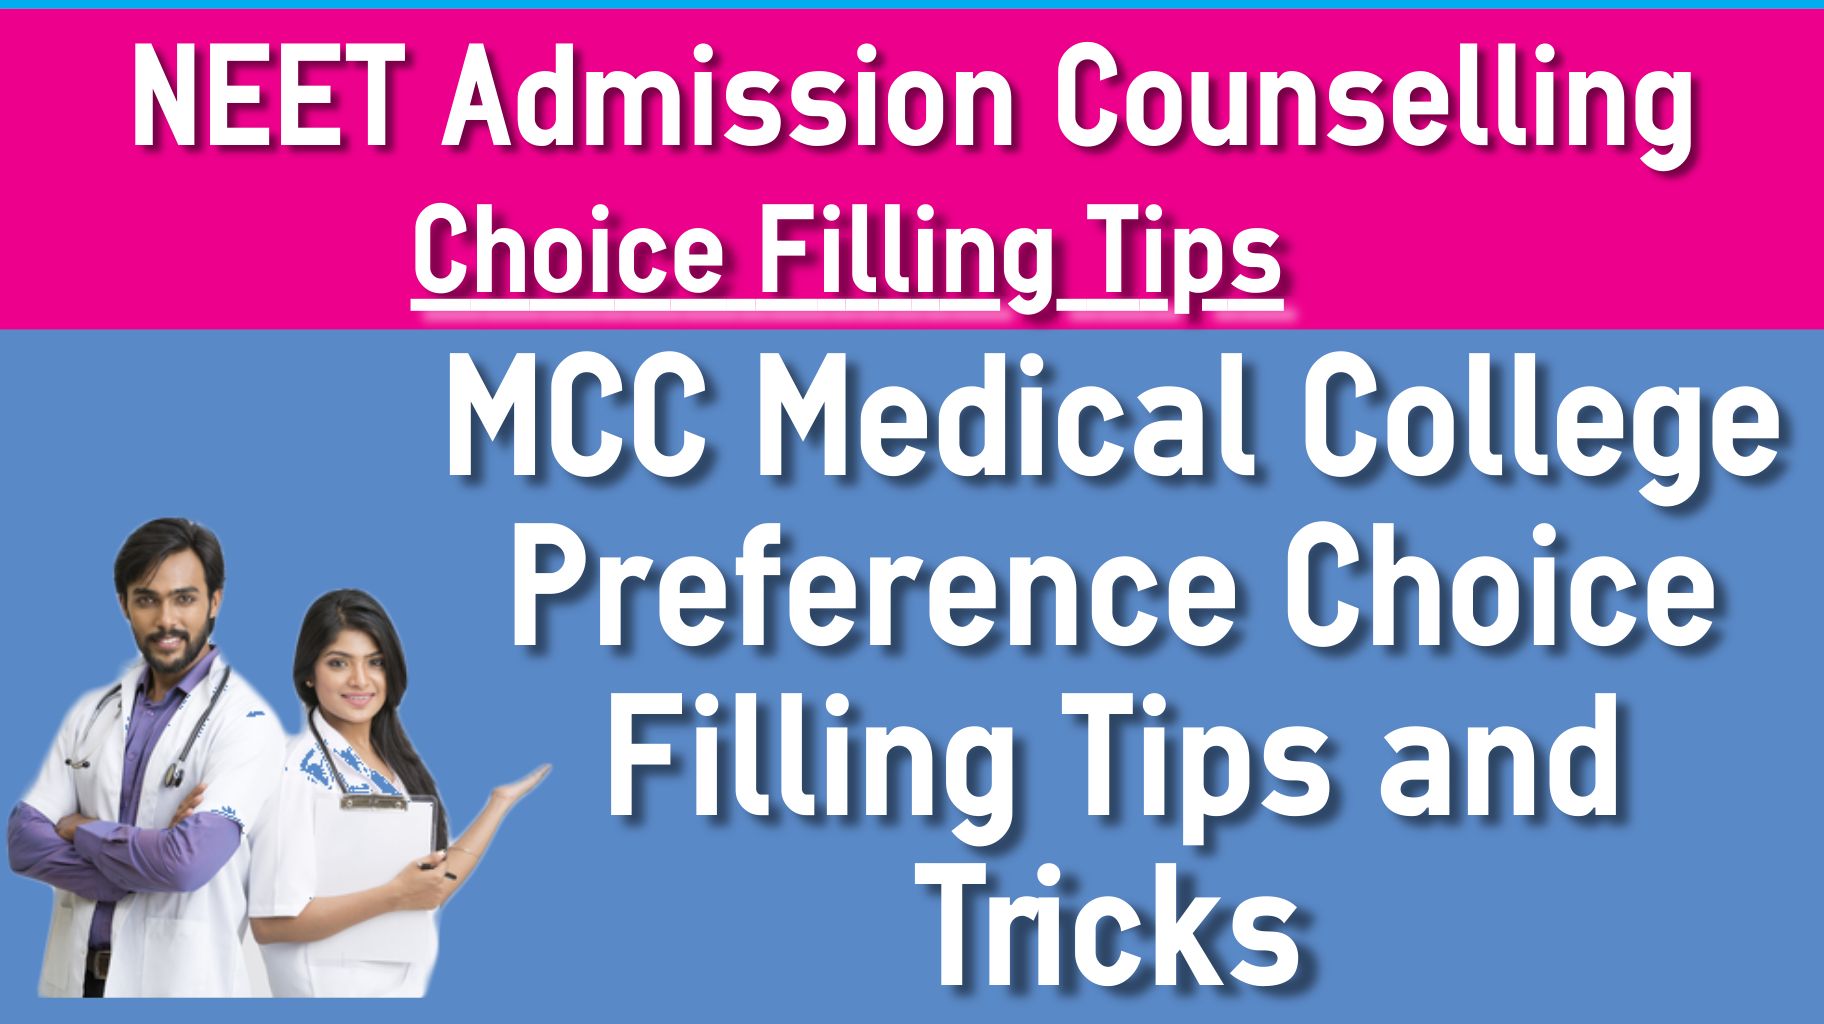 MCC Medical College Preferences Choice Filling Tips and Tricks